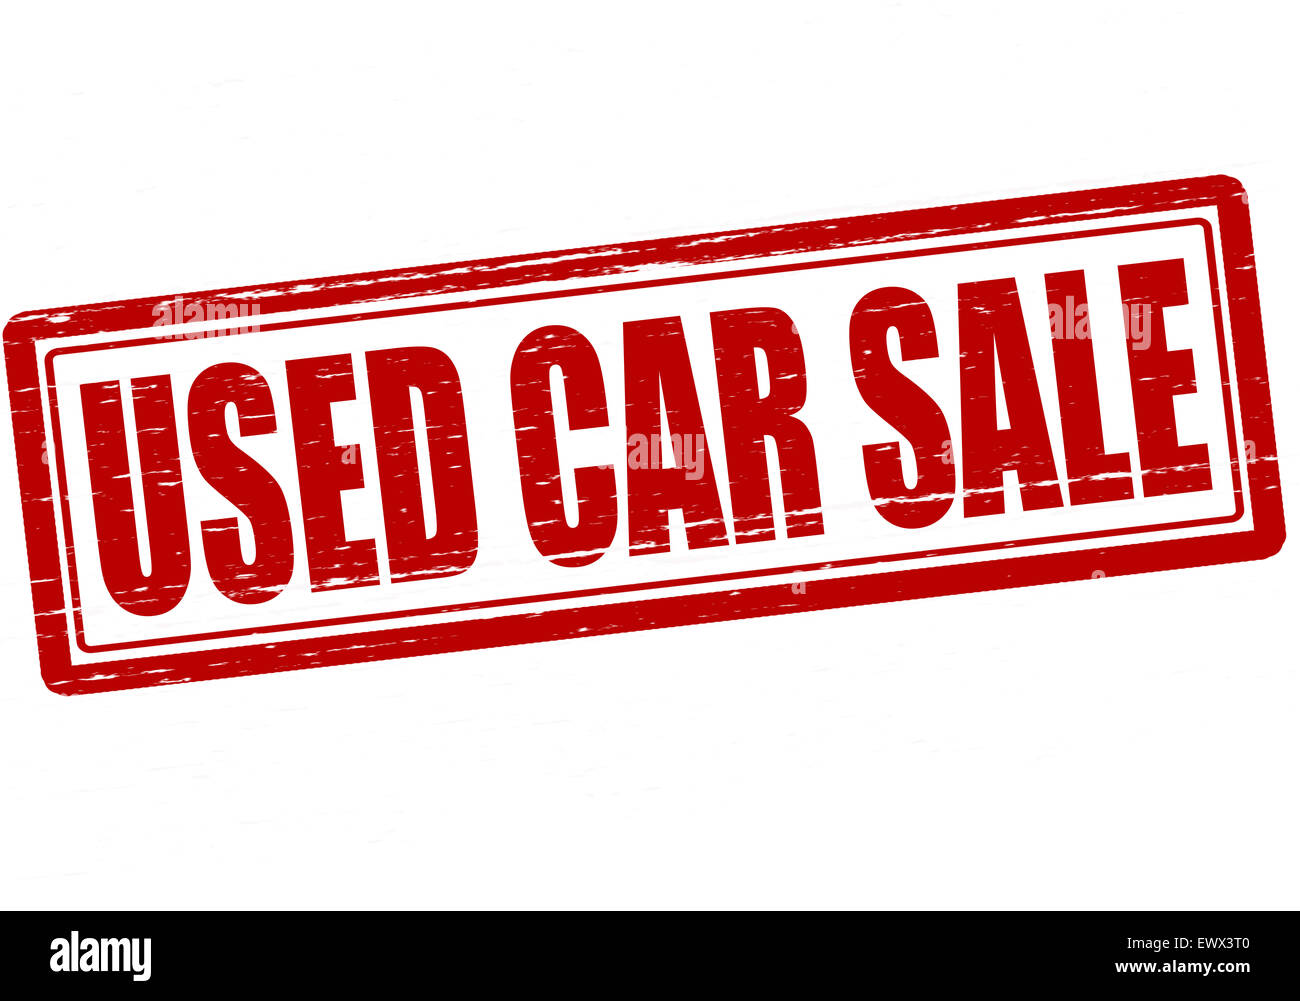 Stamp with text used car sale inside, illustration Stock Photo